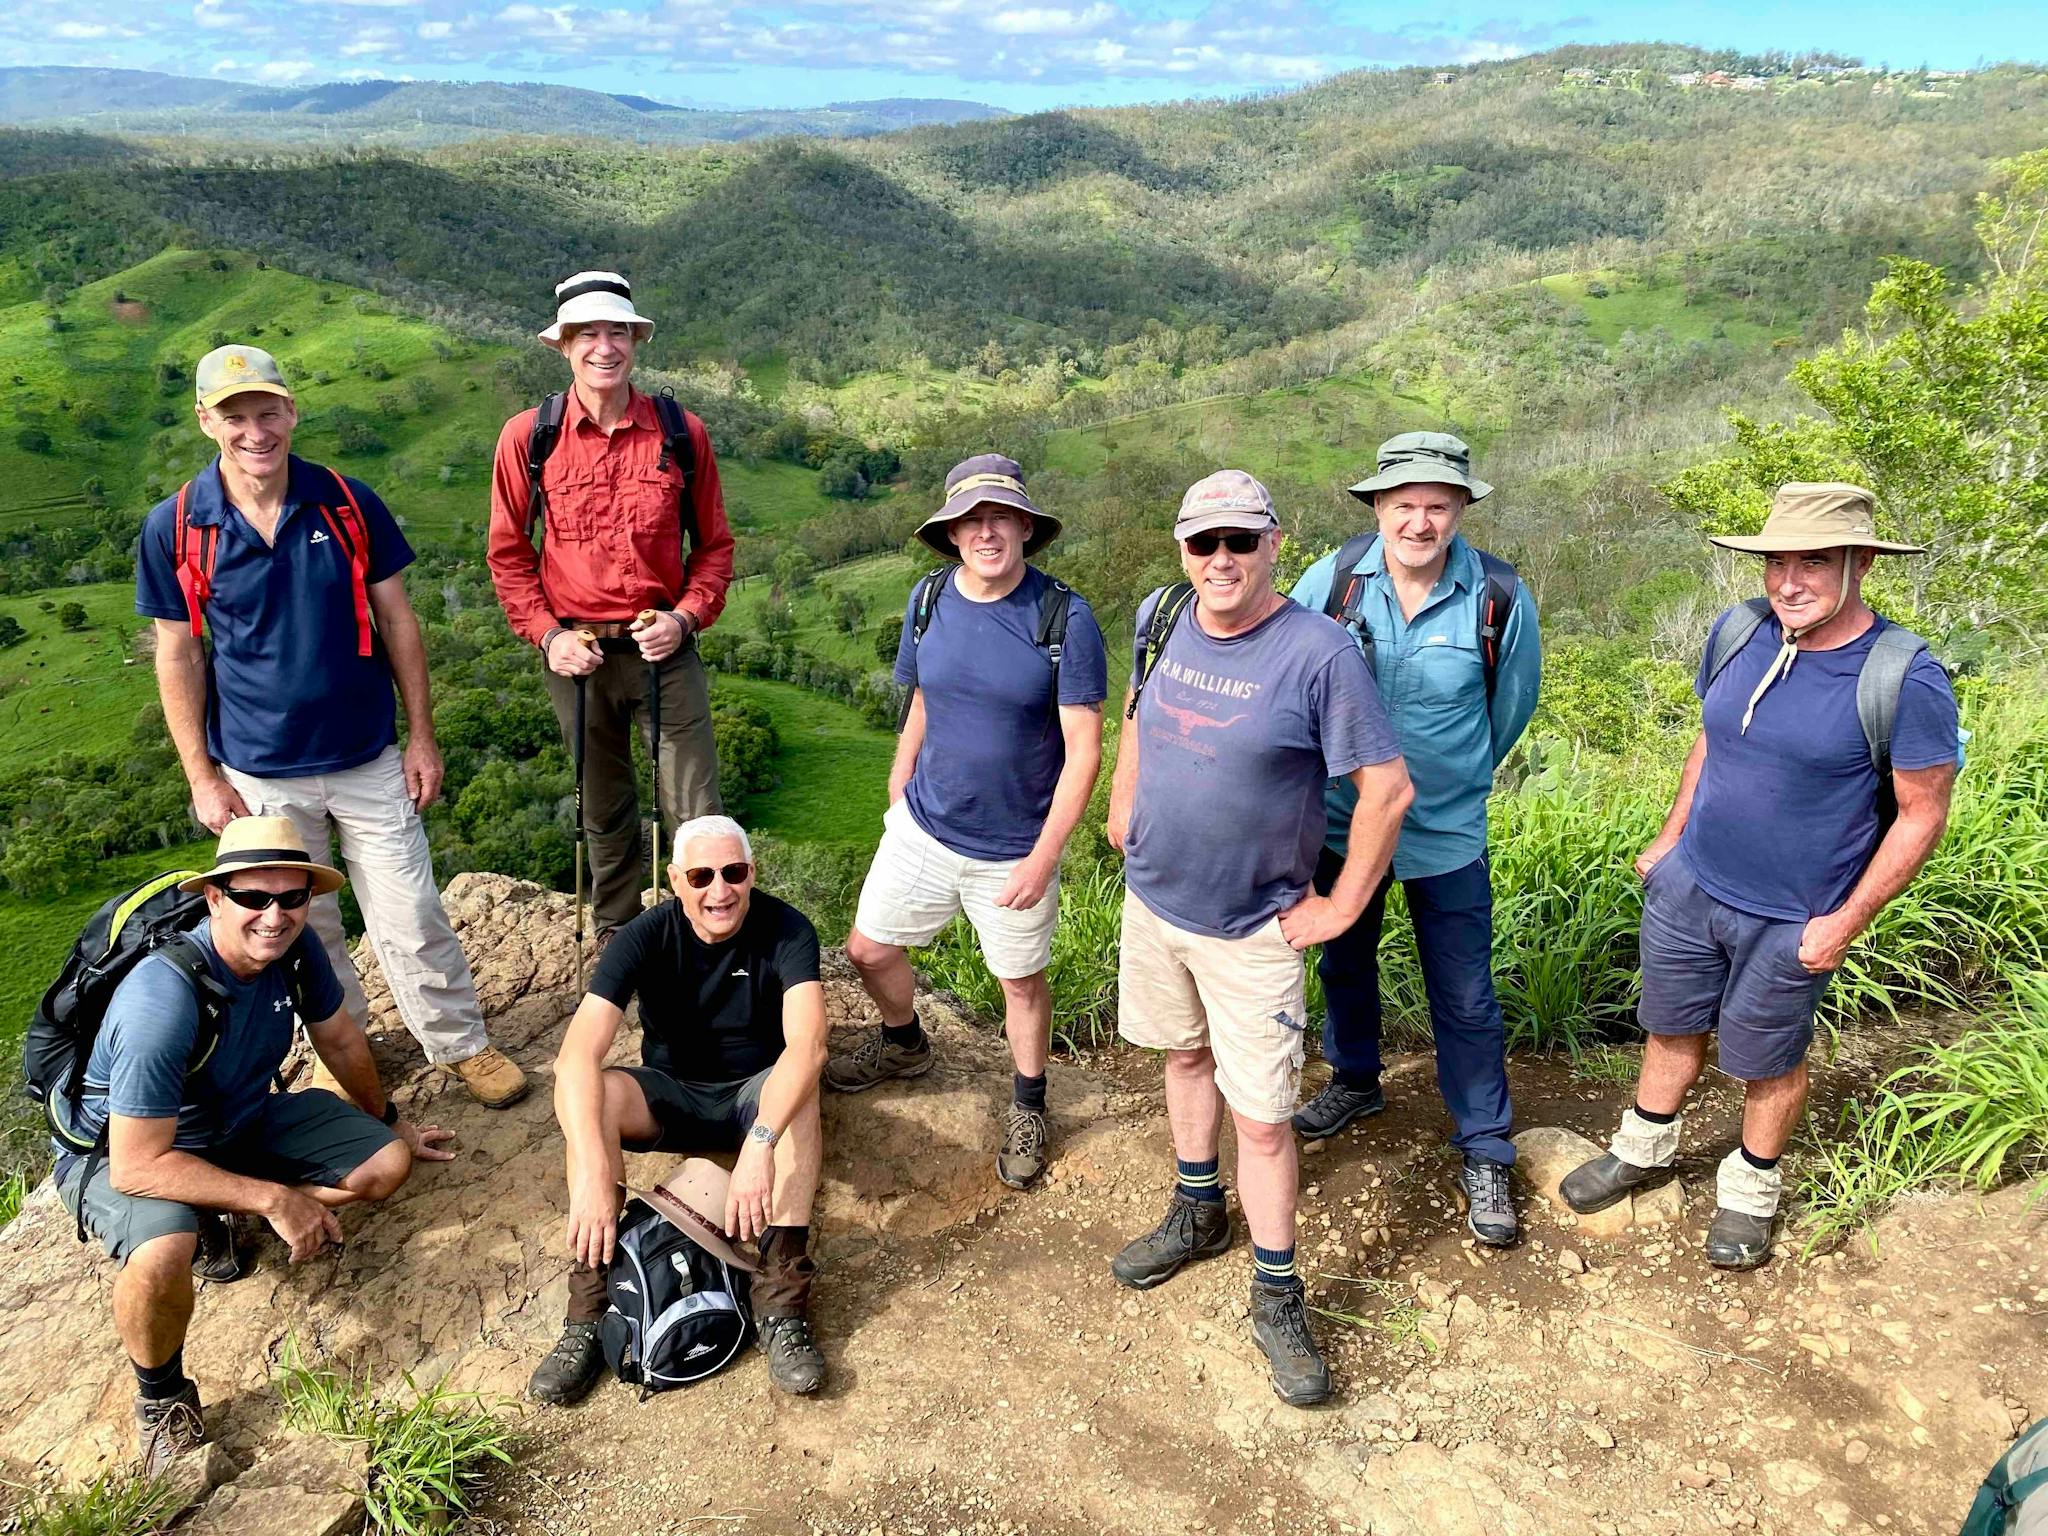 8 men posing for a photo while on a day hike